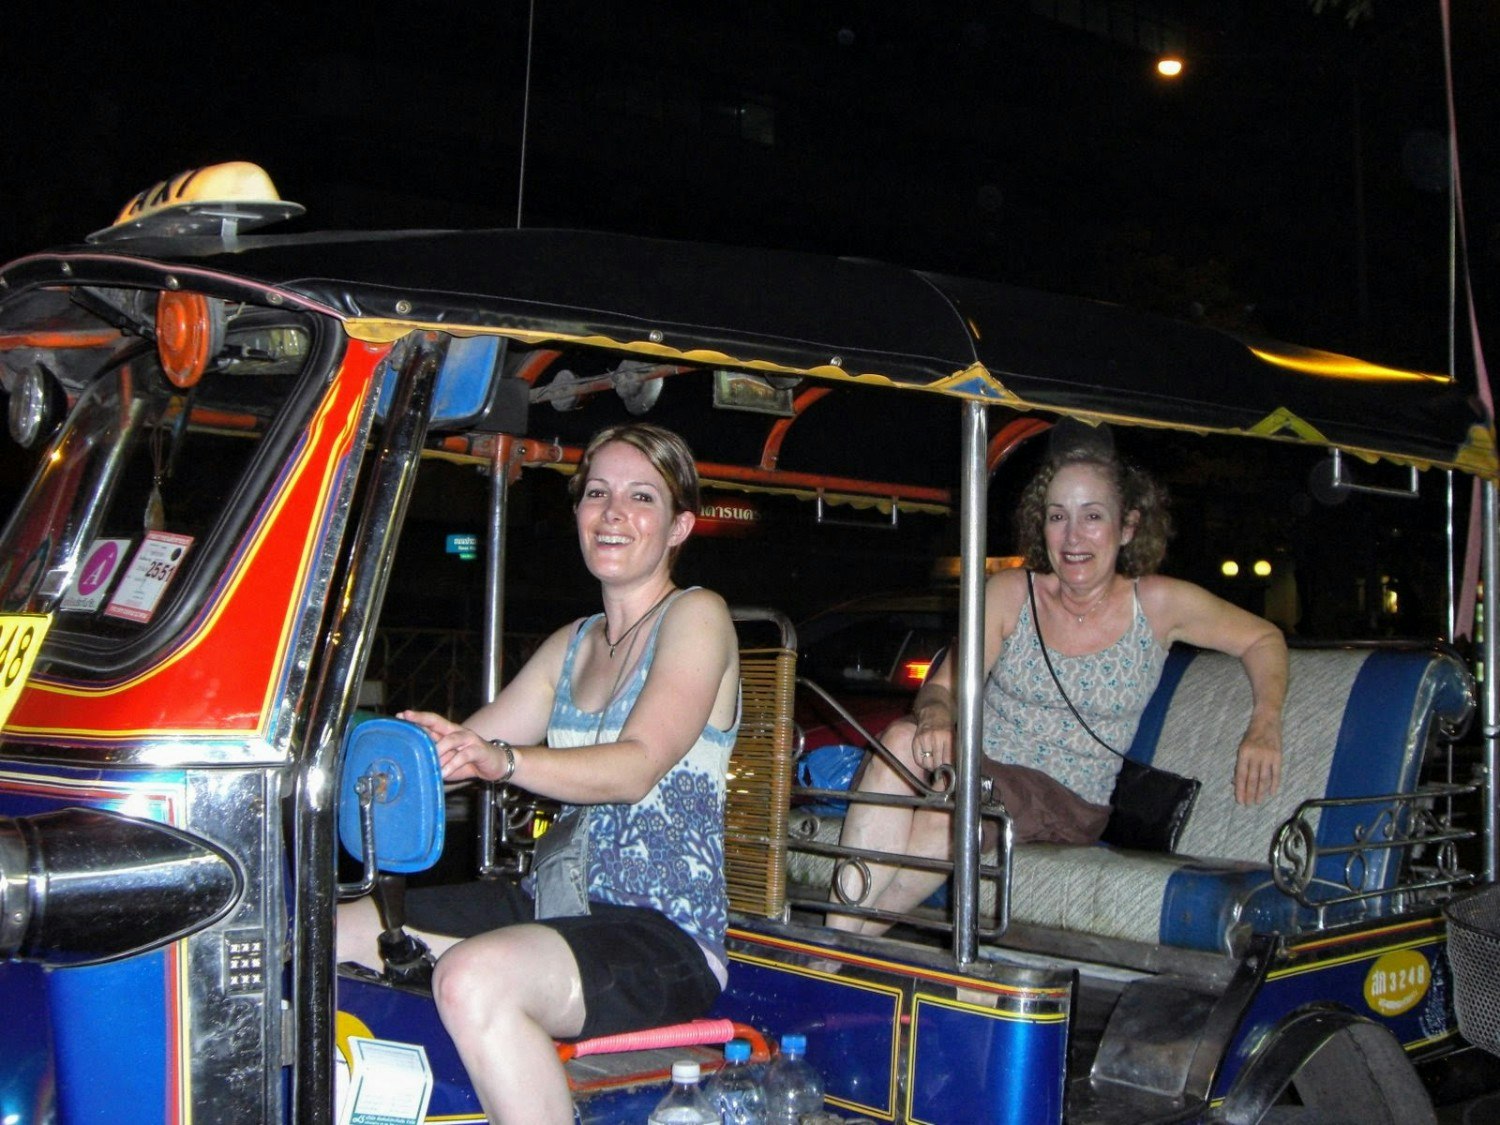 Maxine and Laura DeCook traveling in a tuk tuk in Thailand